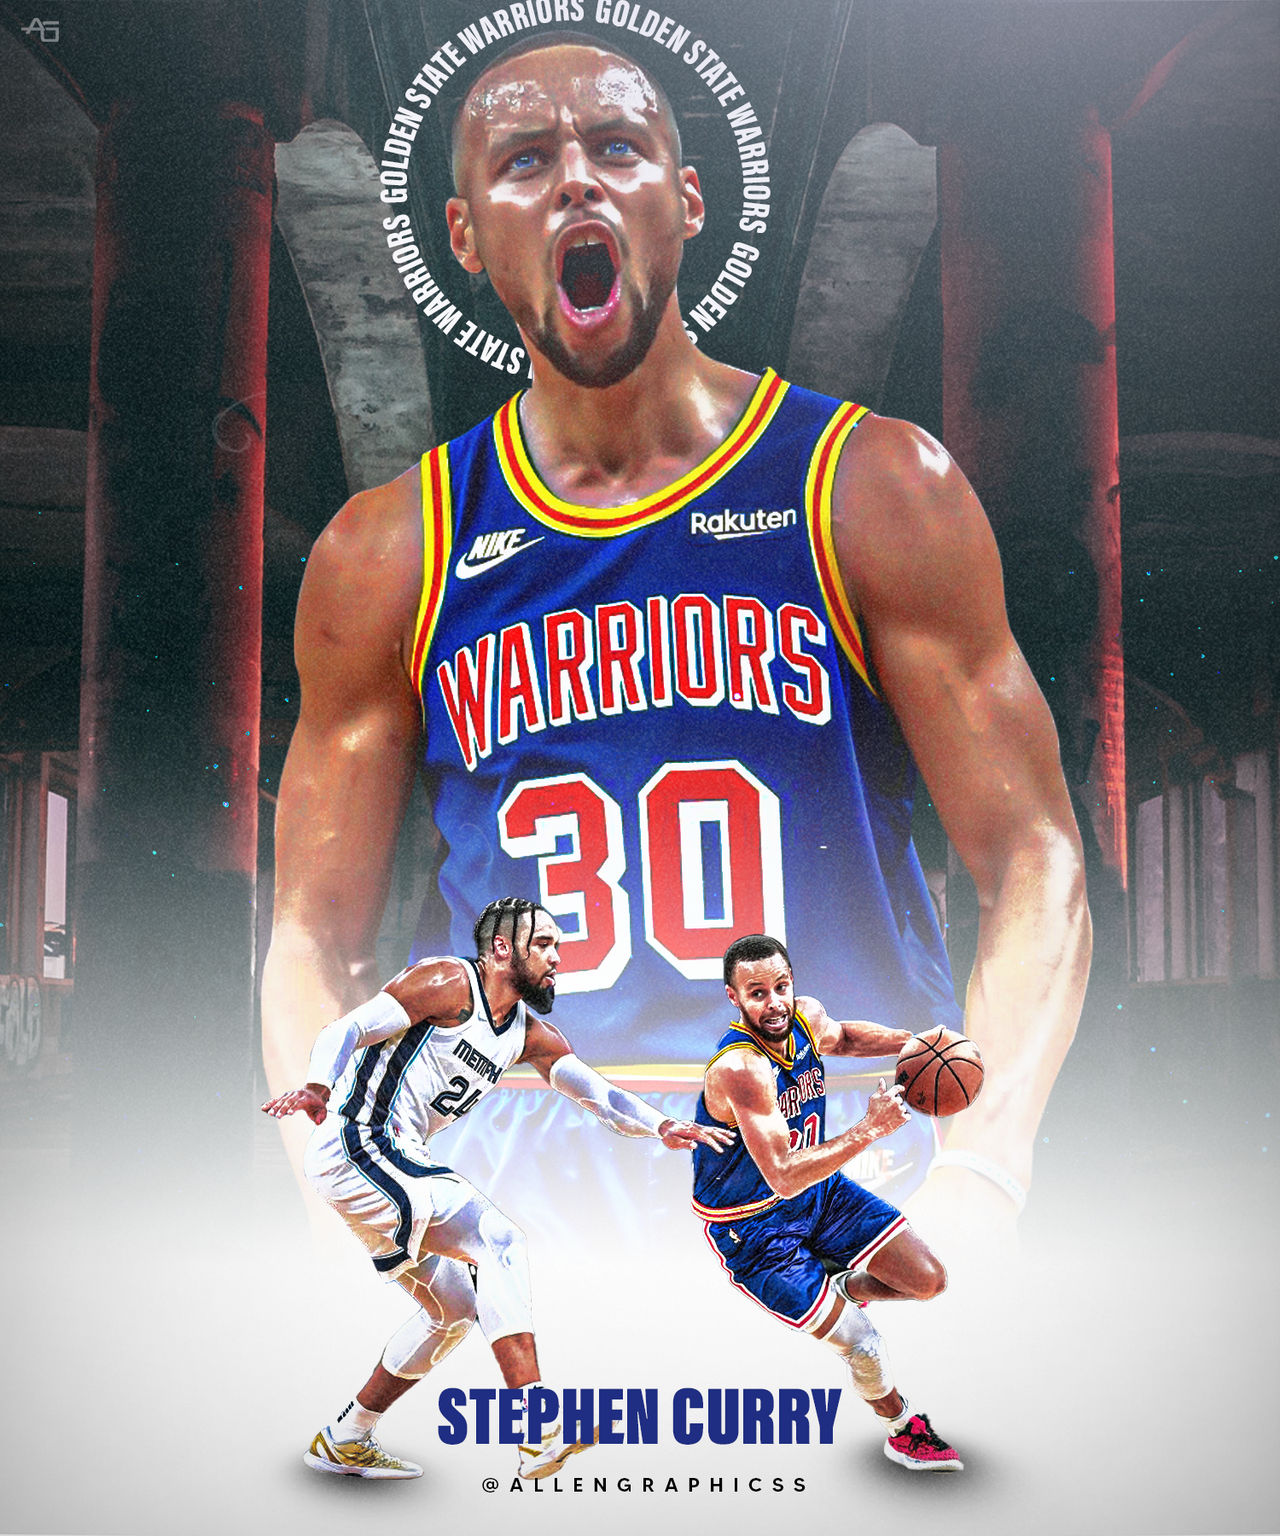 Steph Curry Poster Design on Behance